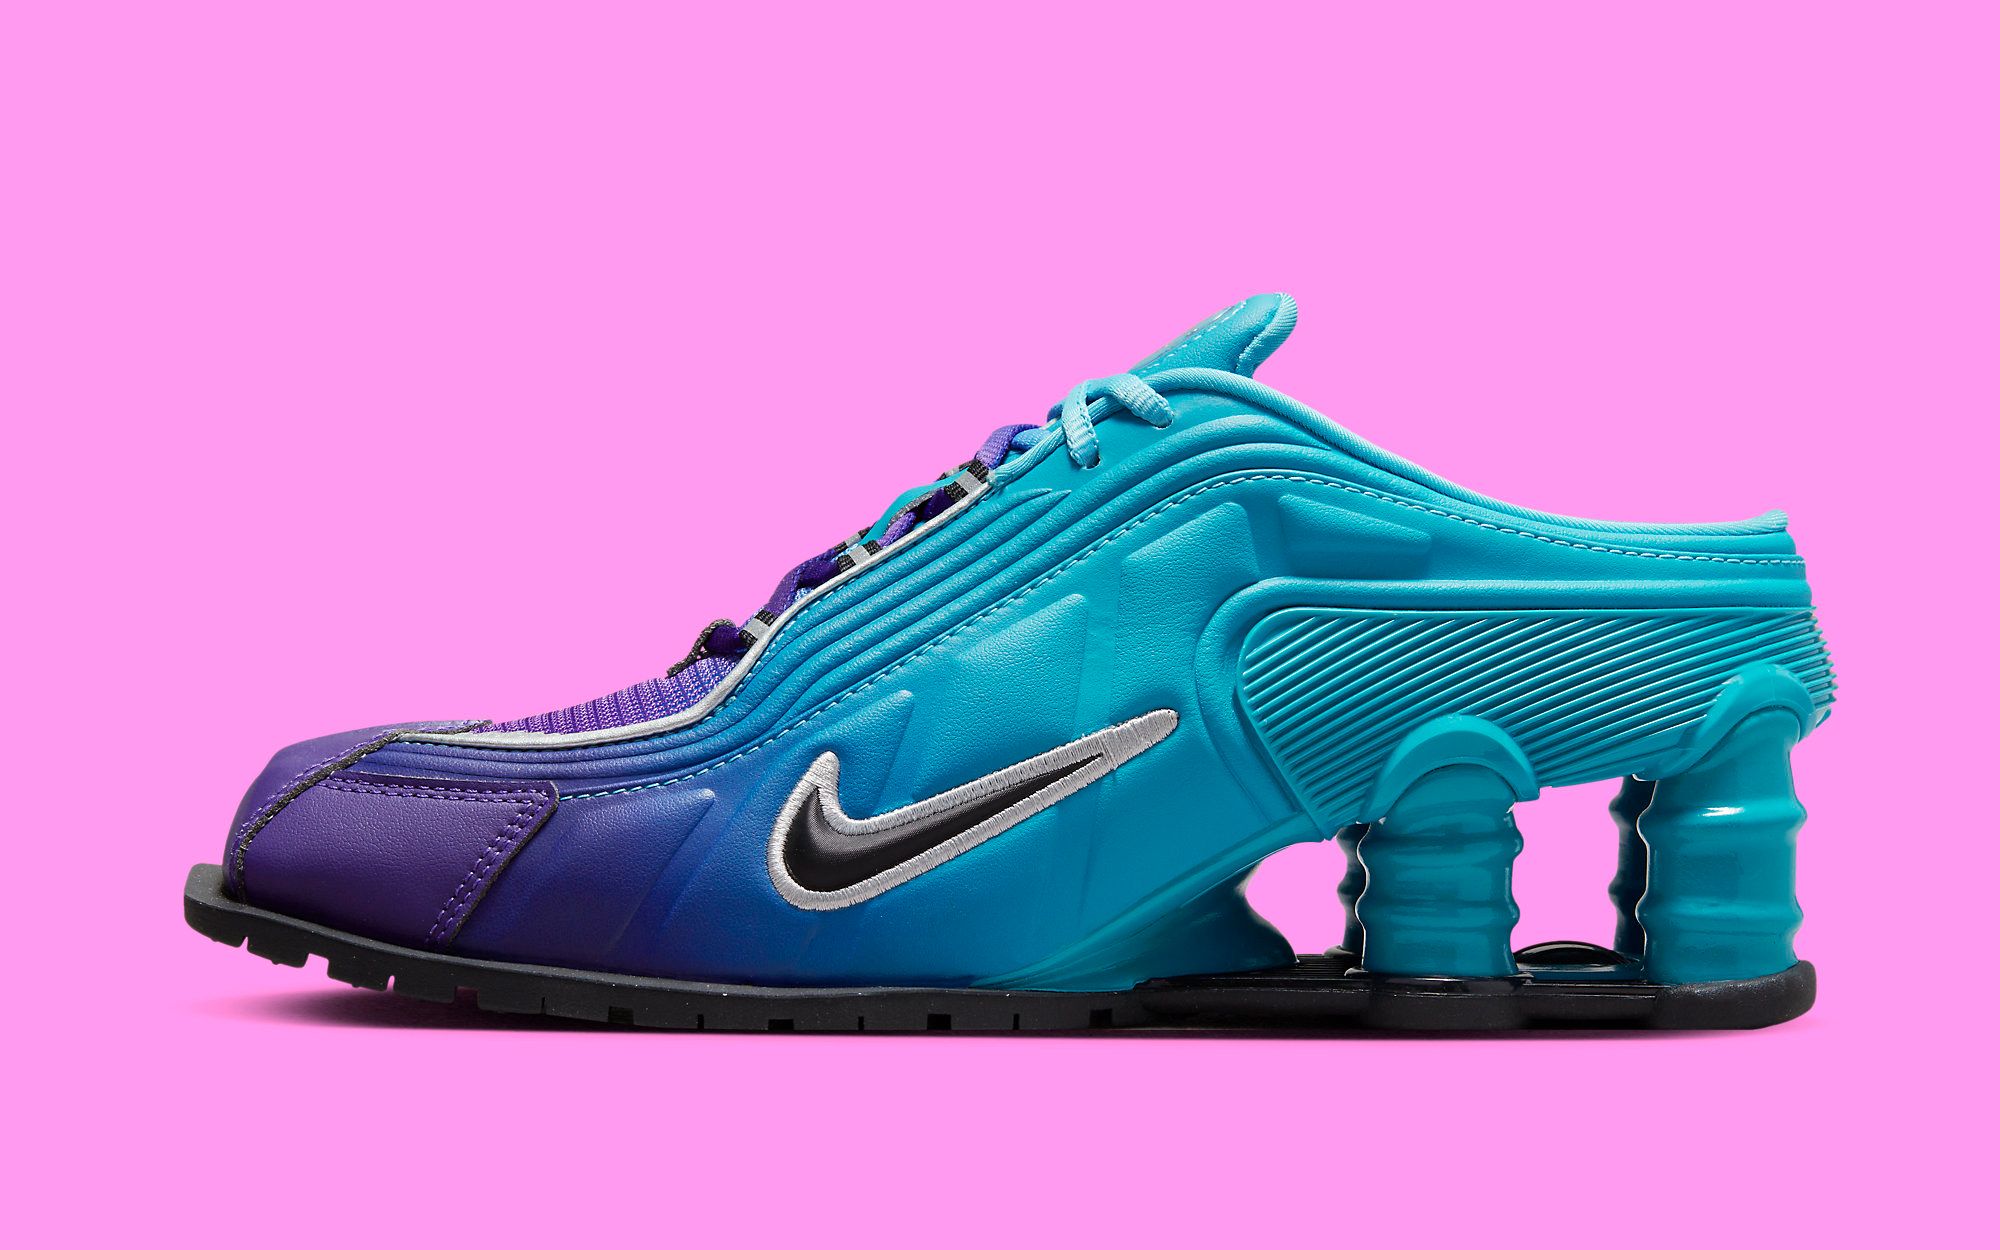 The Martine Rose x Nike Shox MR4 Collection Releases July 27 